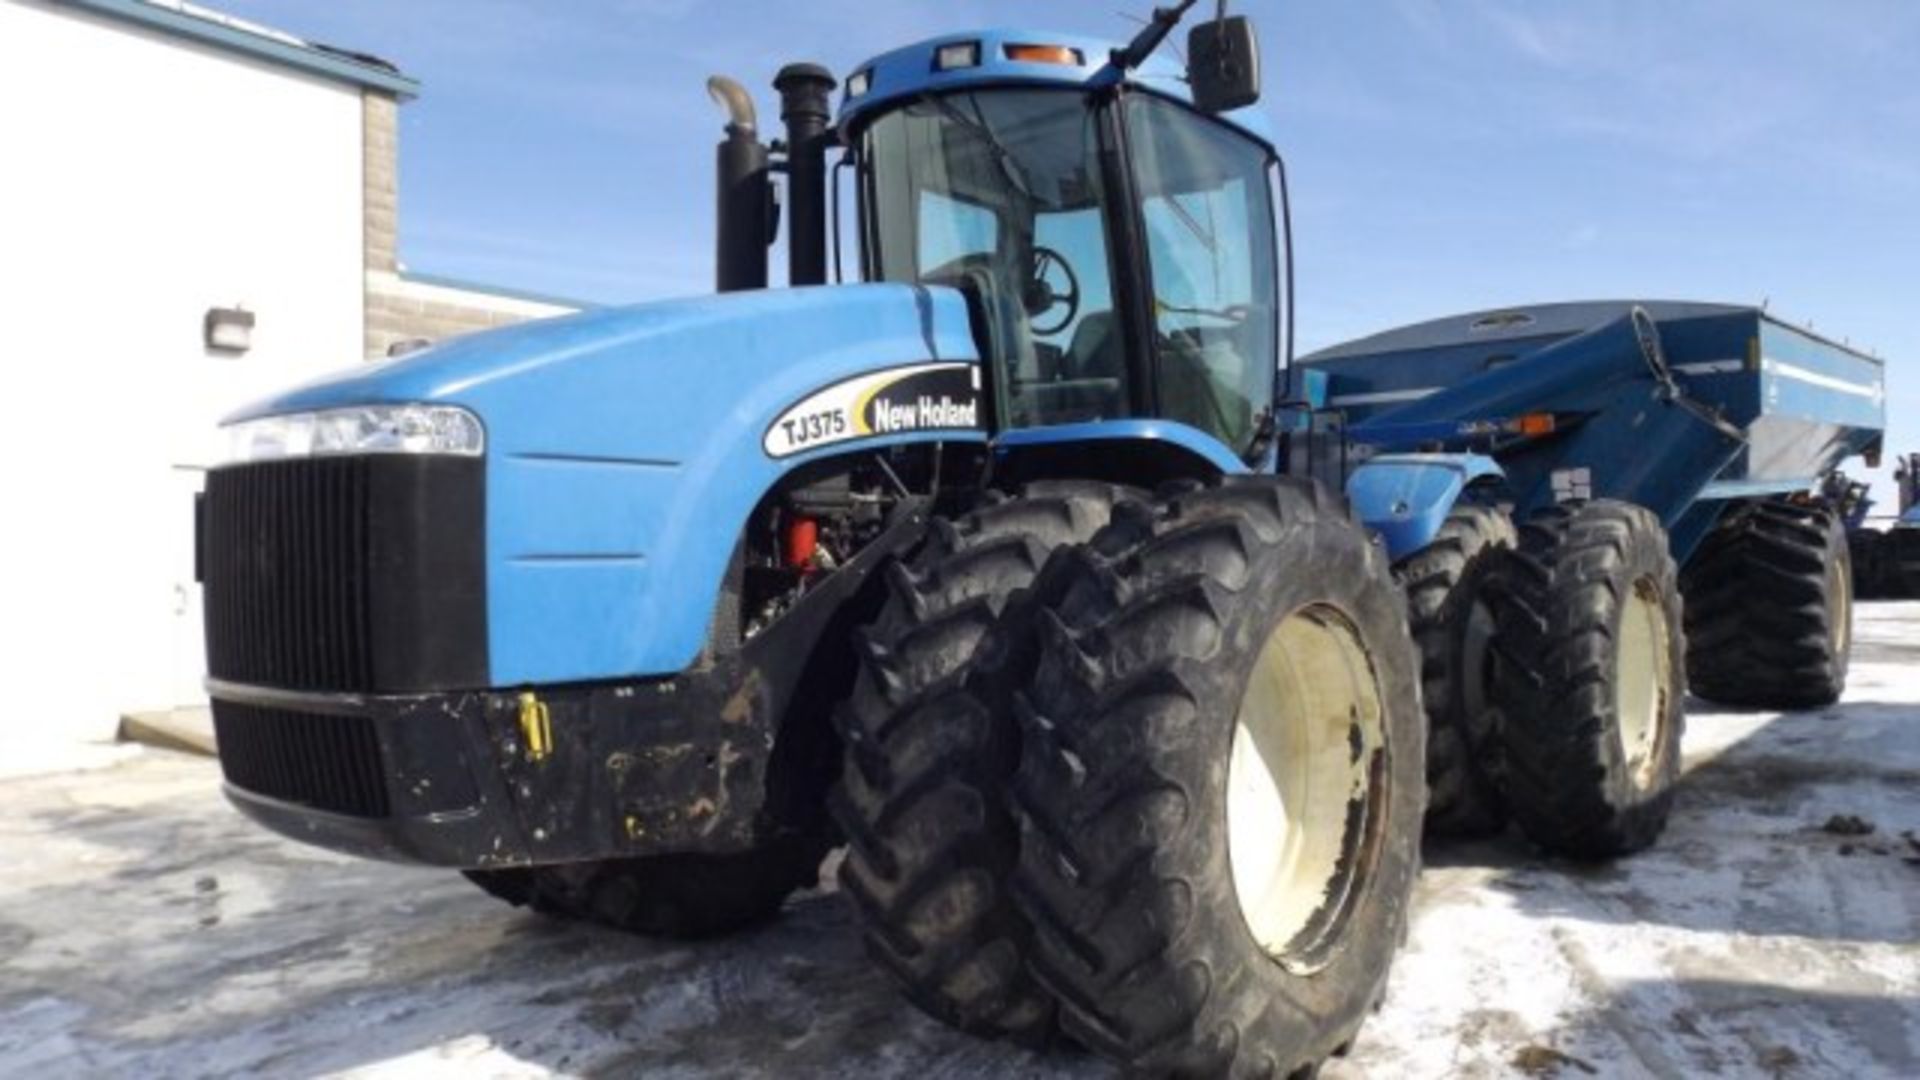 New Holland TJ375 Tractor '03, sn# RVS002016 7683 Hrs, 4WD, Fully Equipped Cab, 375 HP, 16/2 PS,